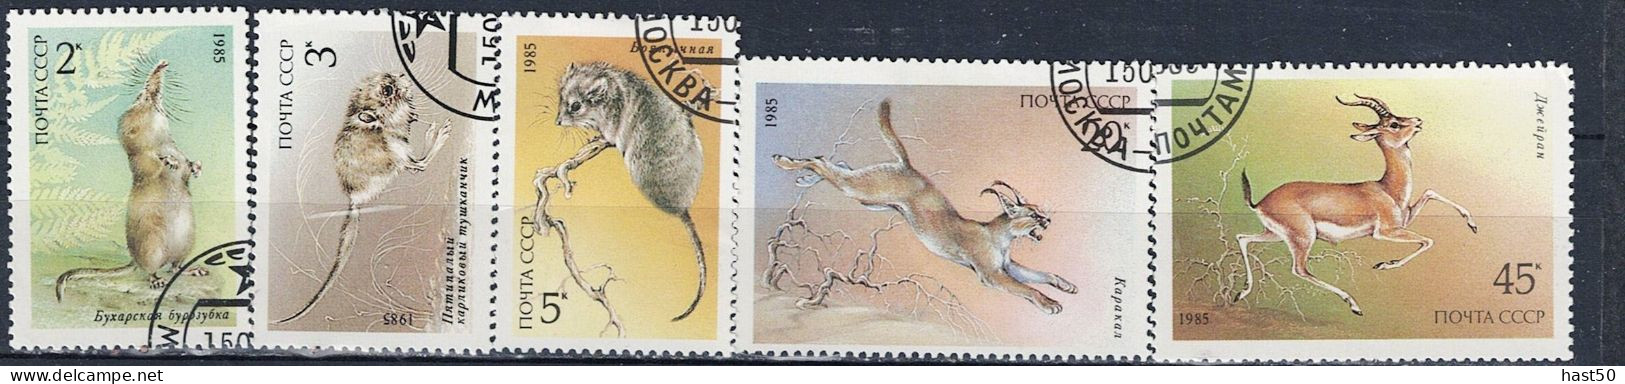 Sowjetunion UdSSR - Geschützte Tiere (MiNr. 5537/41) 1985 - Gest Used Obl - Used Stamps